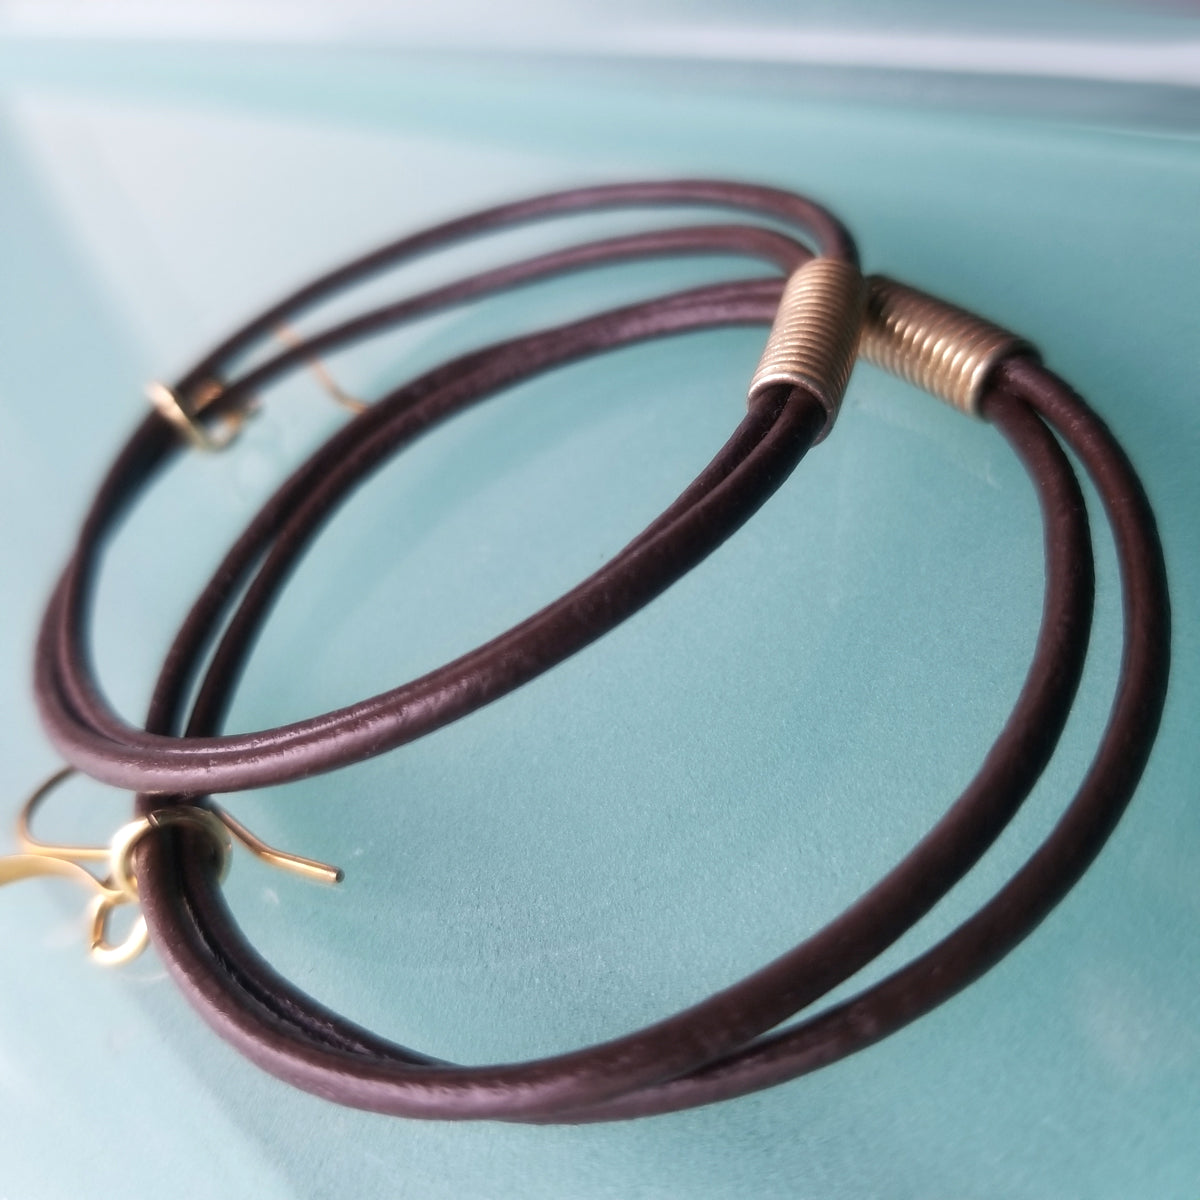 2 mm genuine leather cord hoop earrings in chocolate brown color with gold African Coil Bead